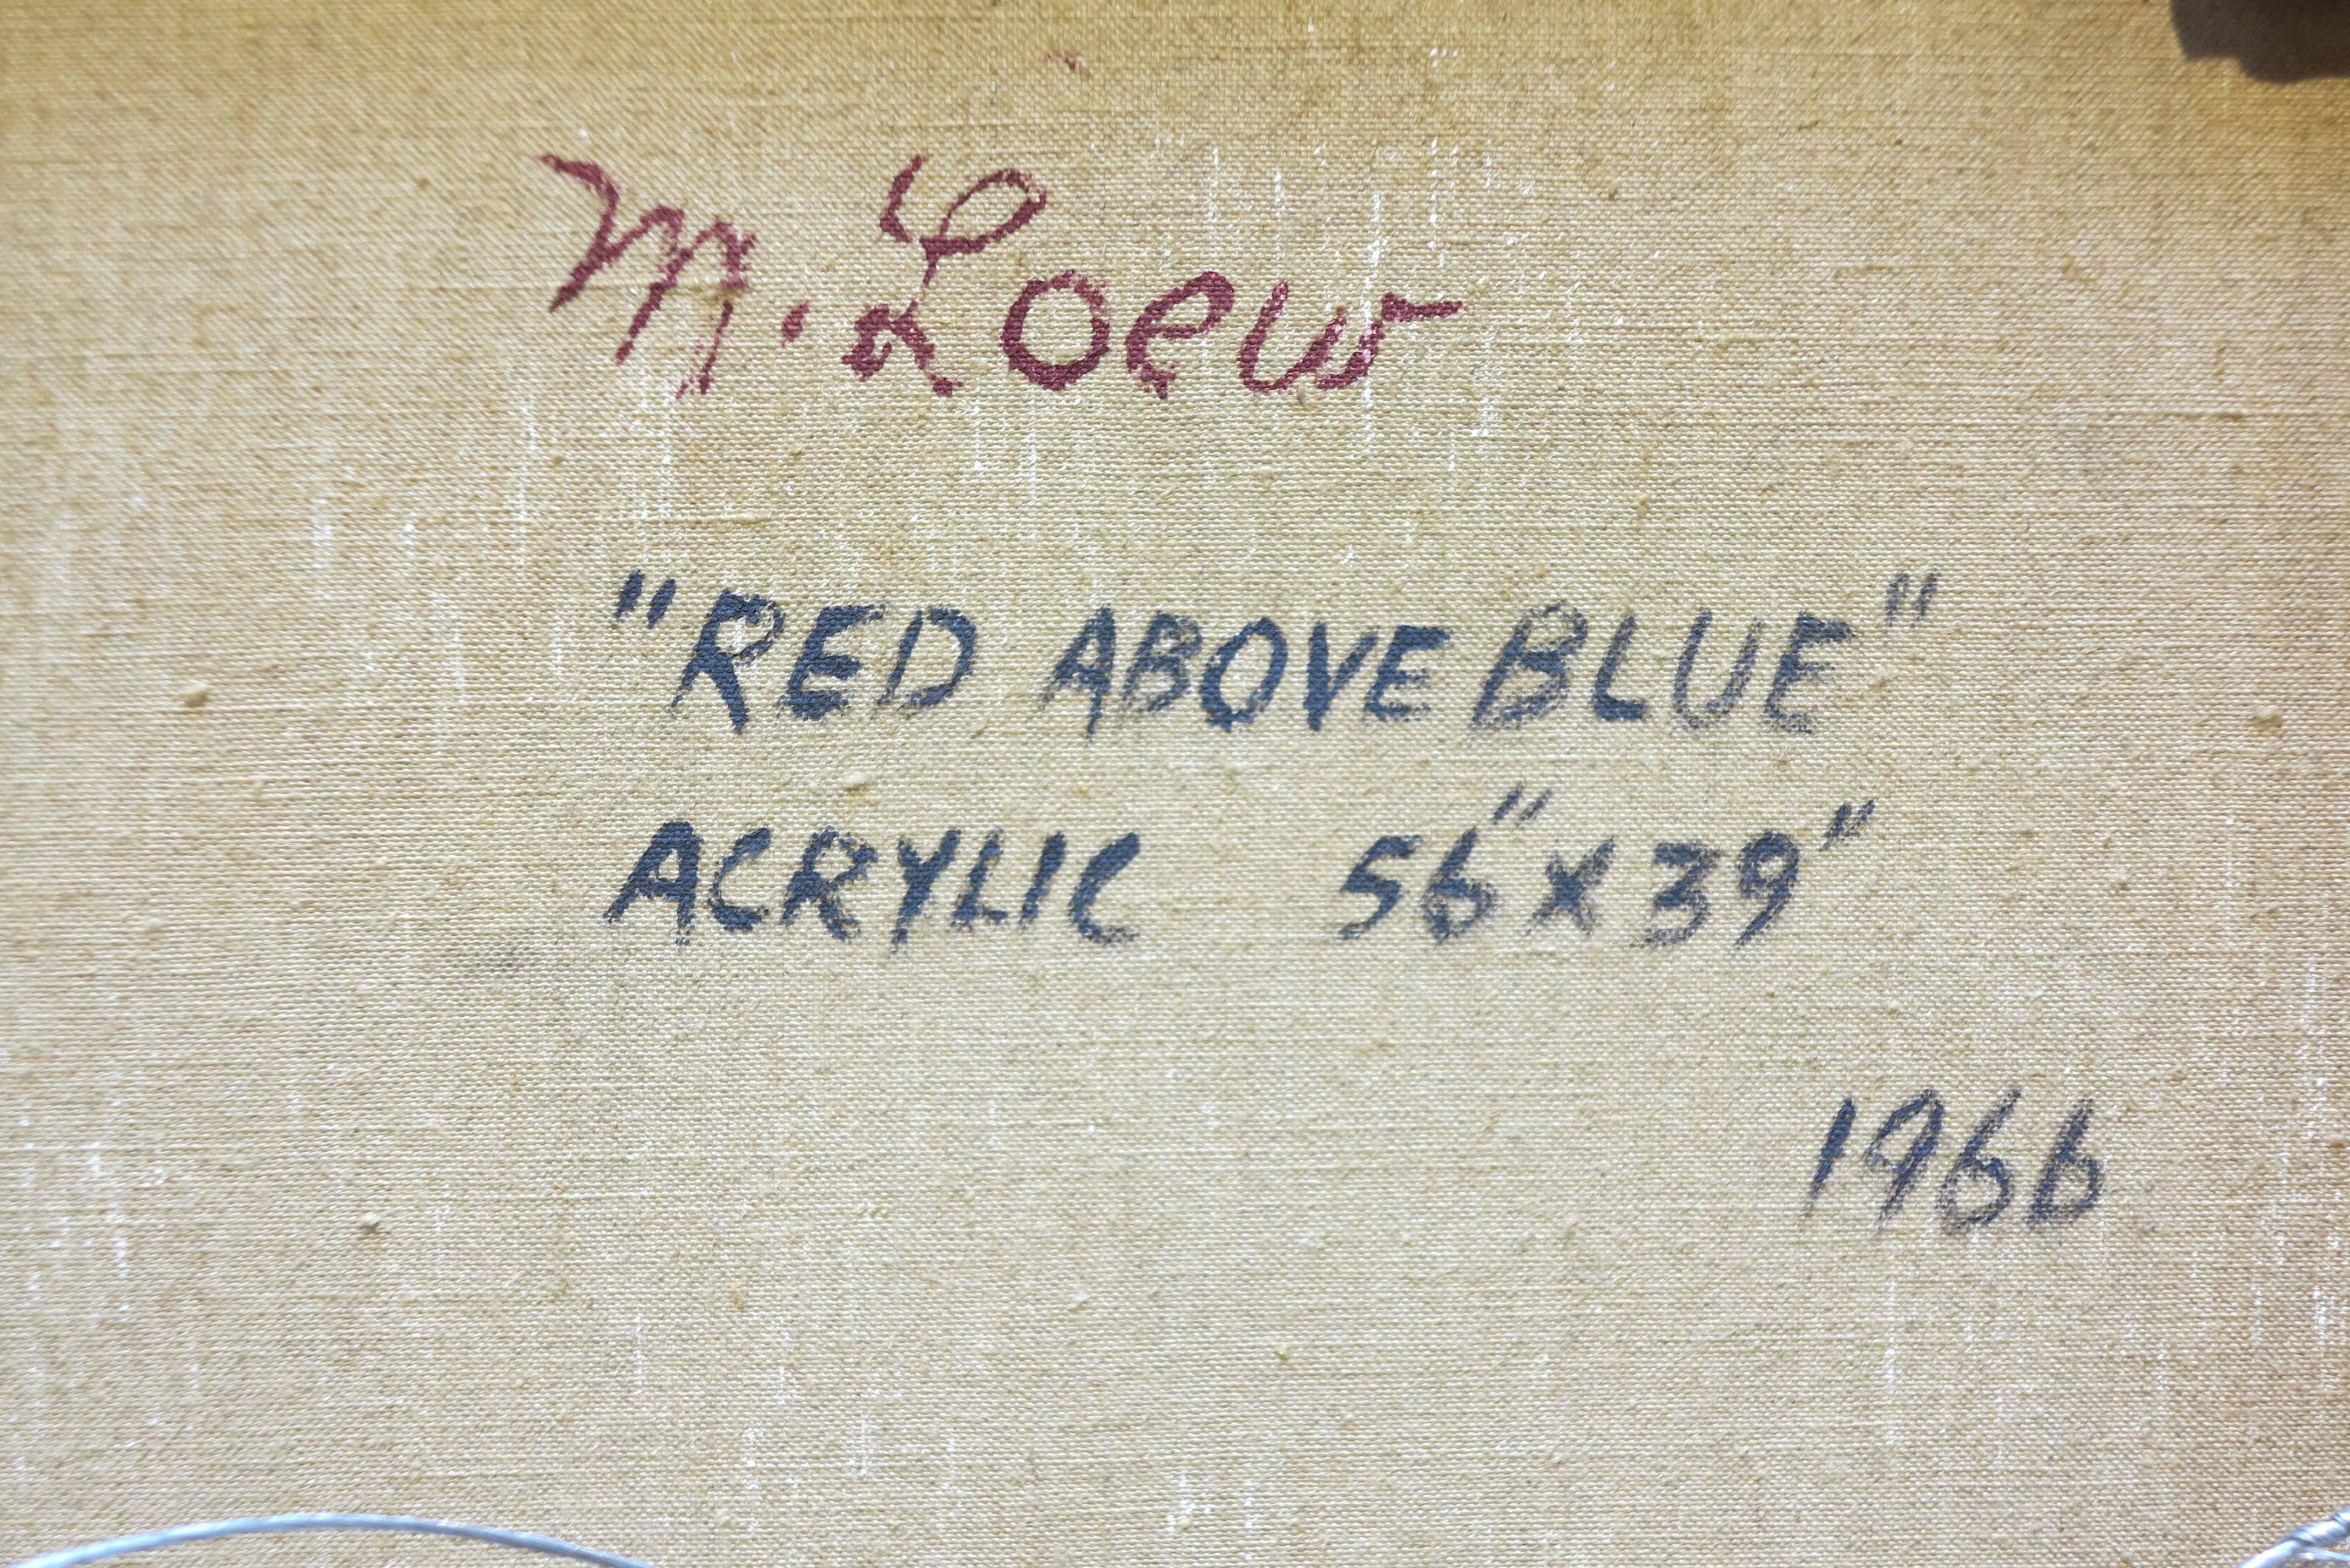 Red Above Blue, 1966 - Hard-Edge Painting by Michael Loew